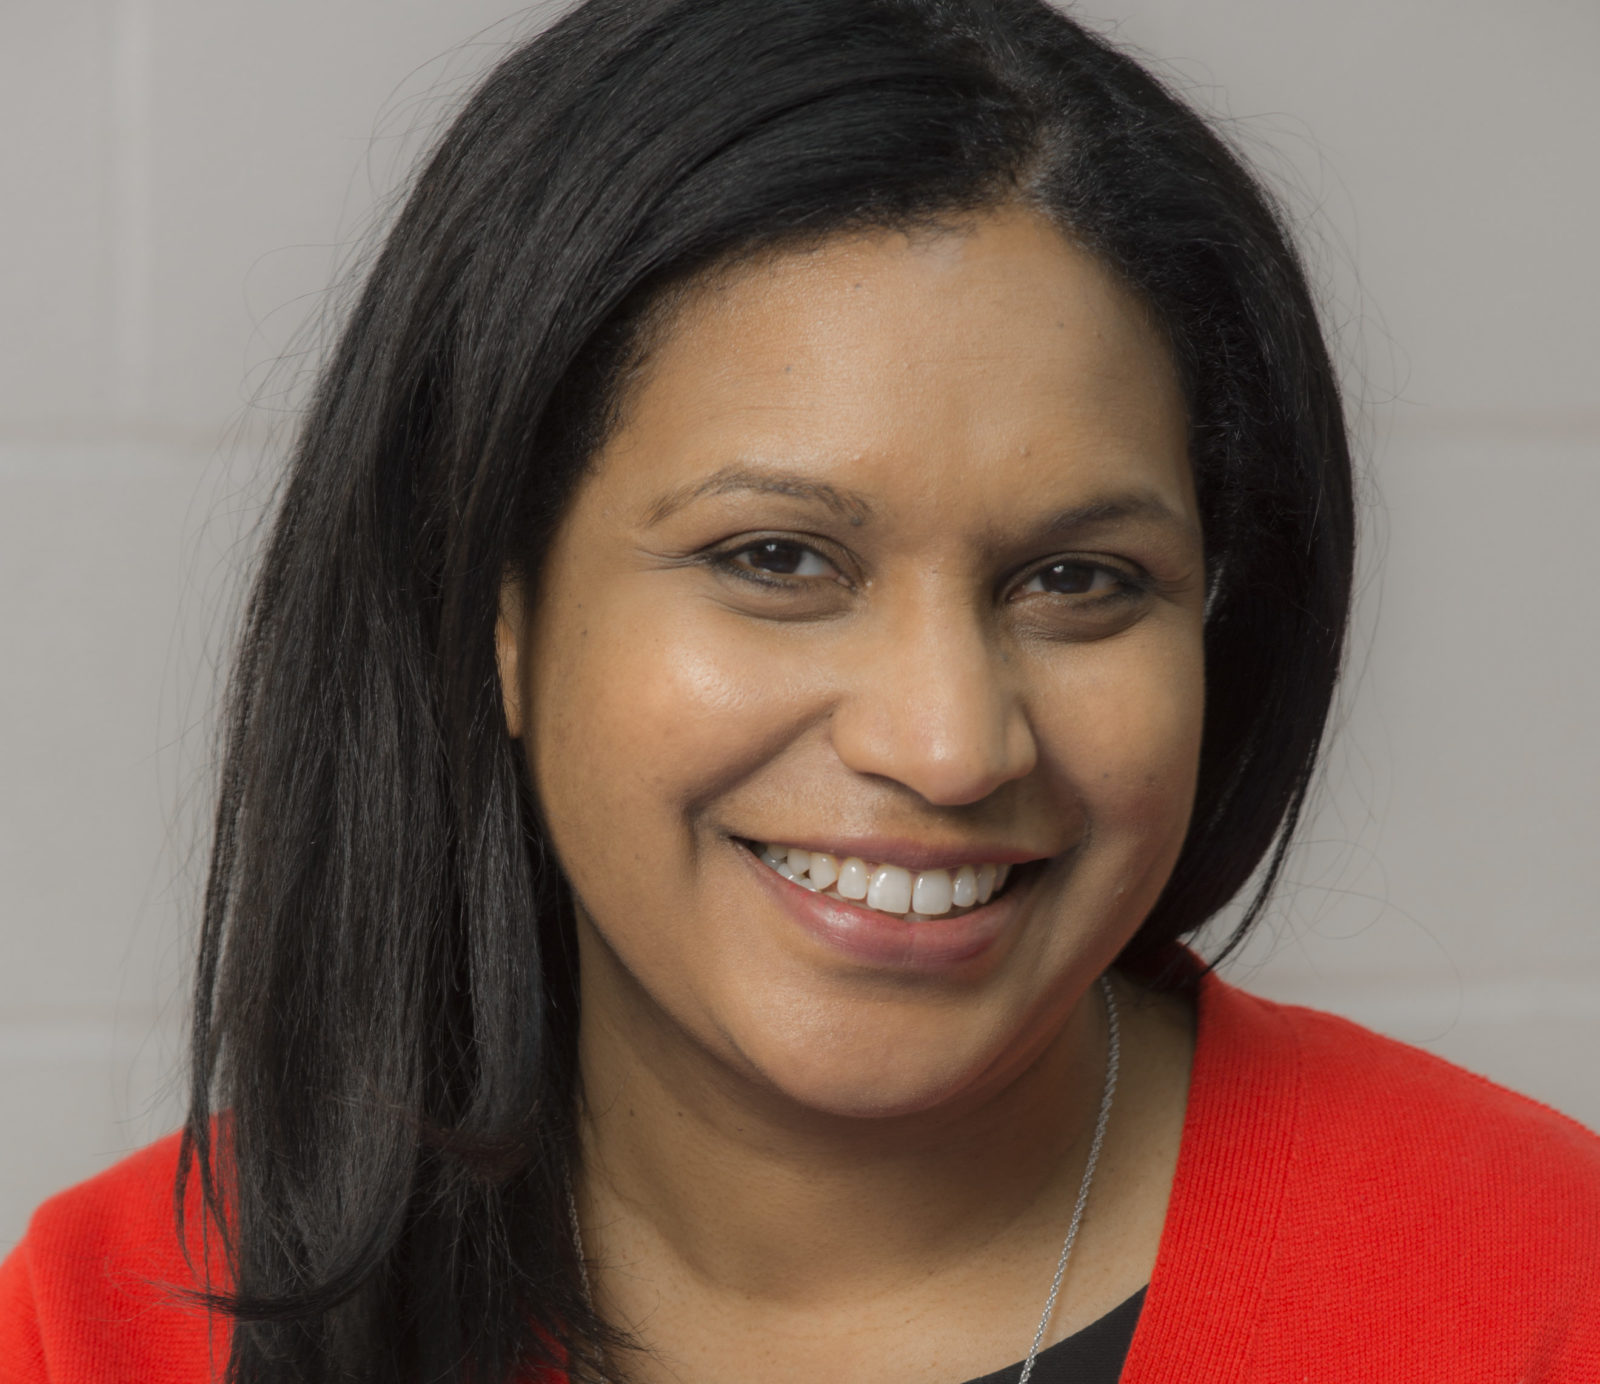 Janet Daby, MP for Lewisham East